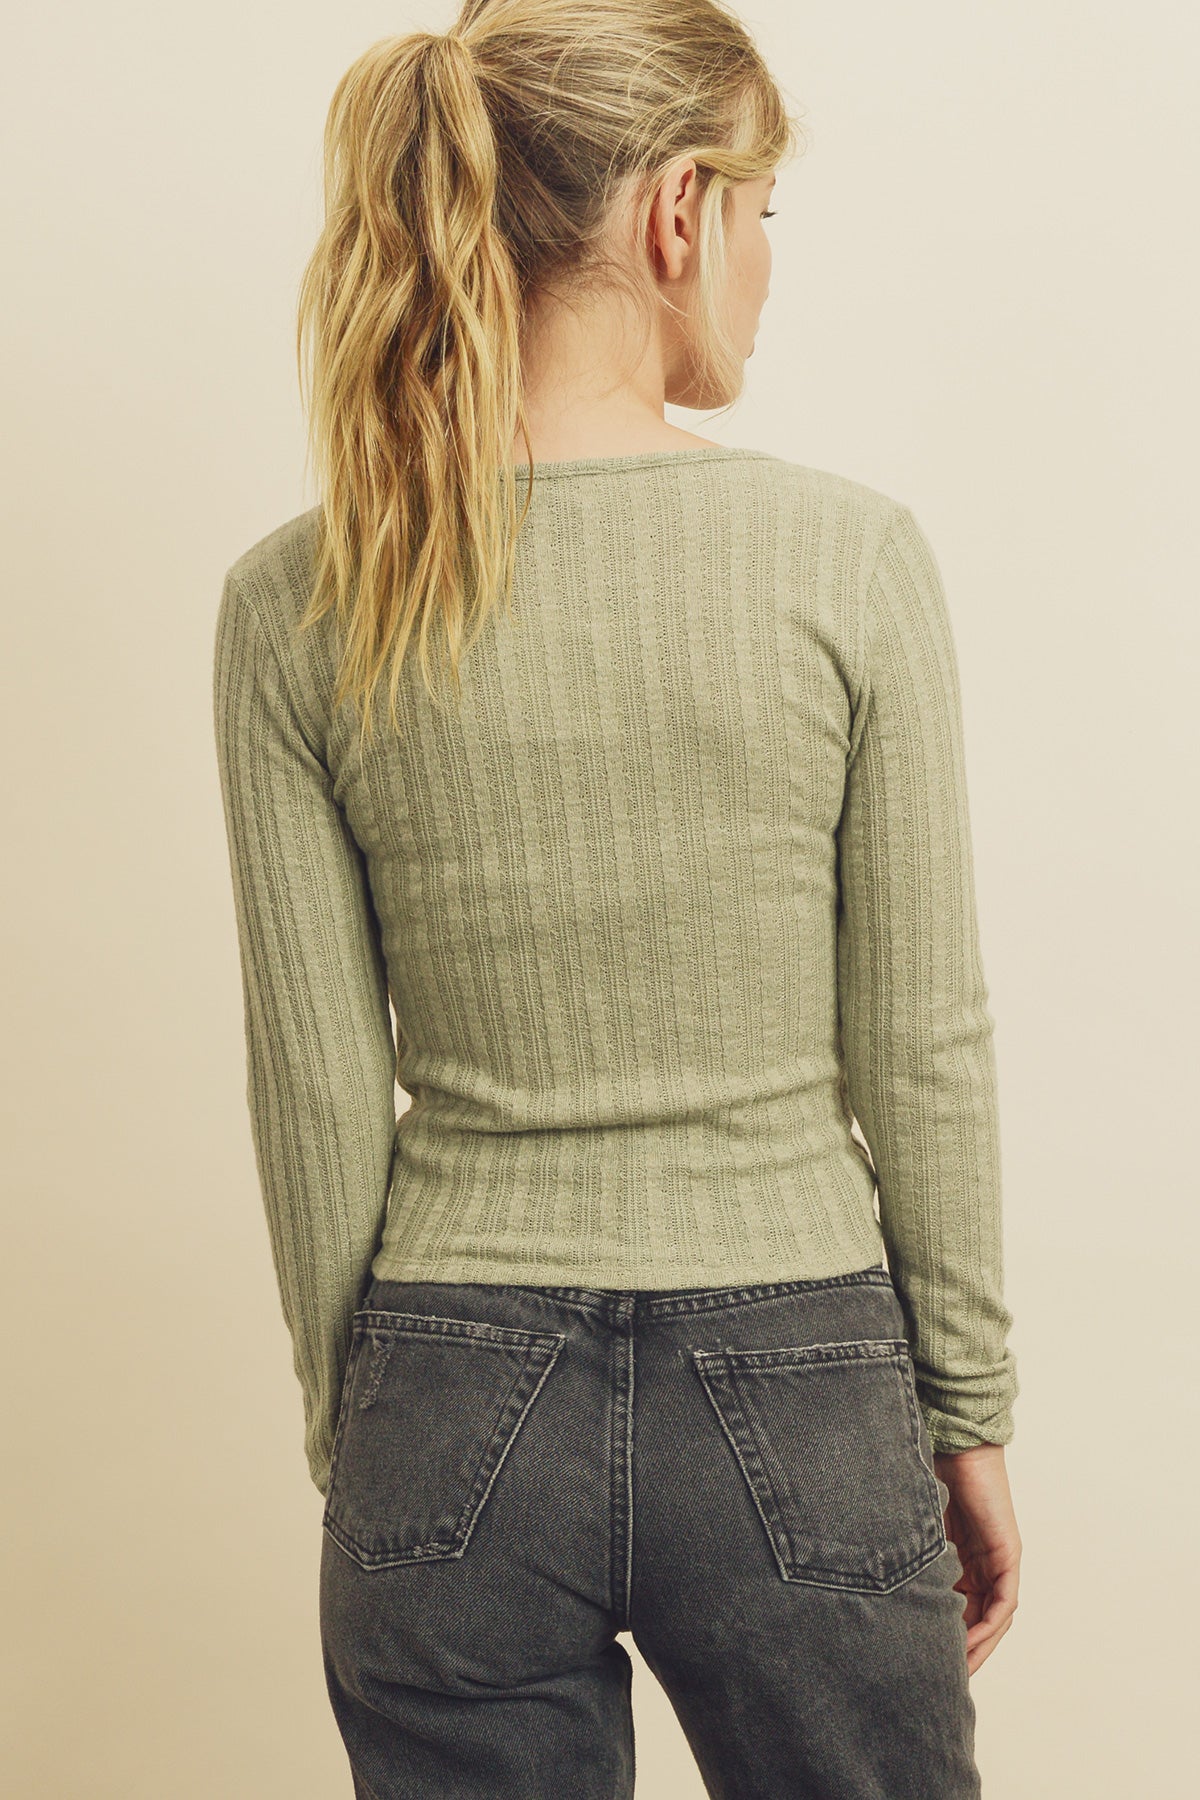 Emma Gathered Top in Sage